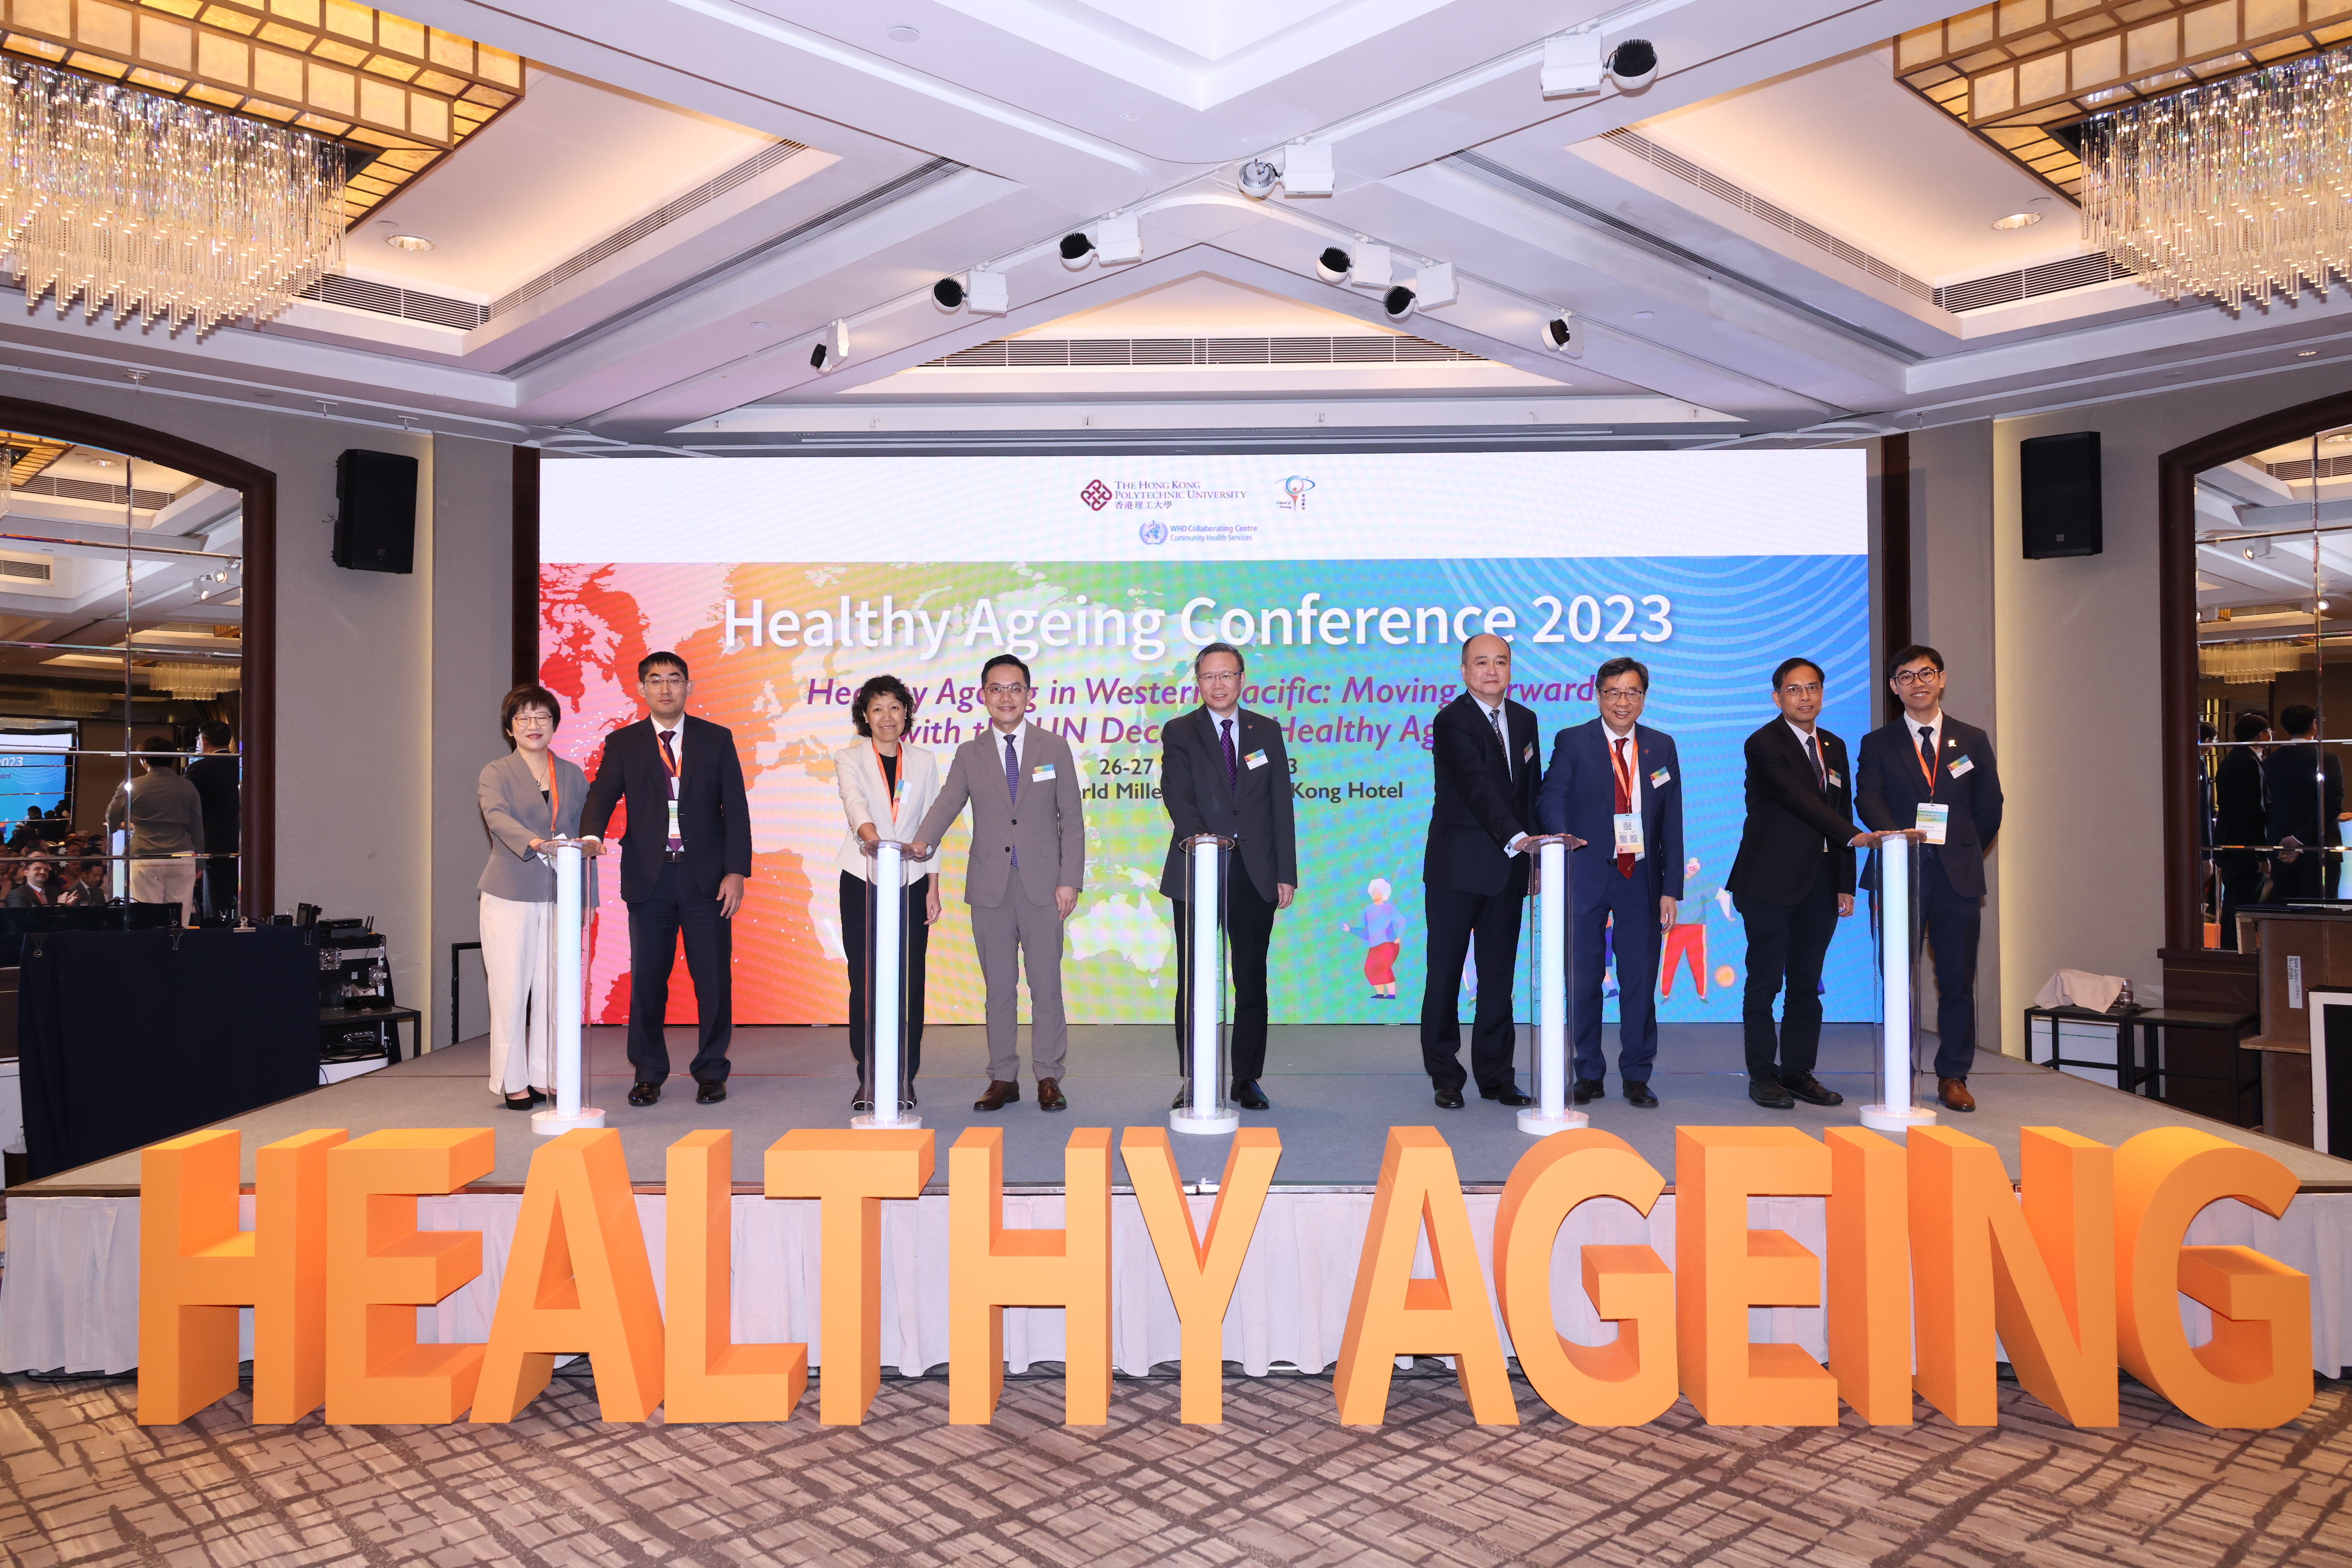 The distinguished guests at the Healthy Ageing Conference 2023 presided over the inaugural ceremony, symbolizing the collective commitment of conference participants to promote healthy ageing in the Western Pacific region in alignment with the United Nations